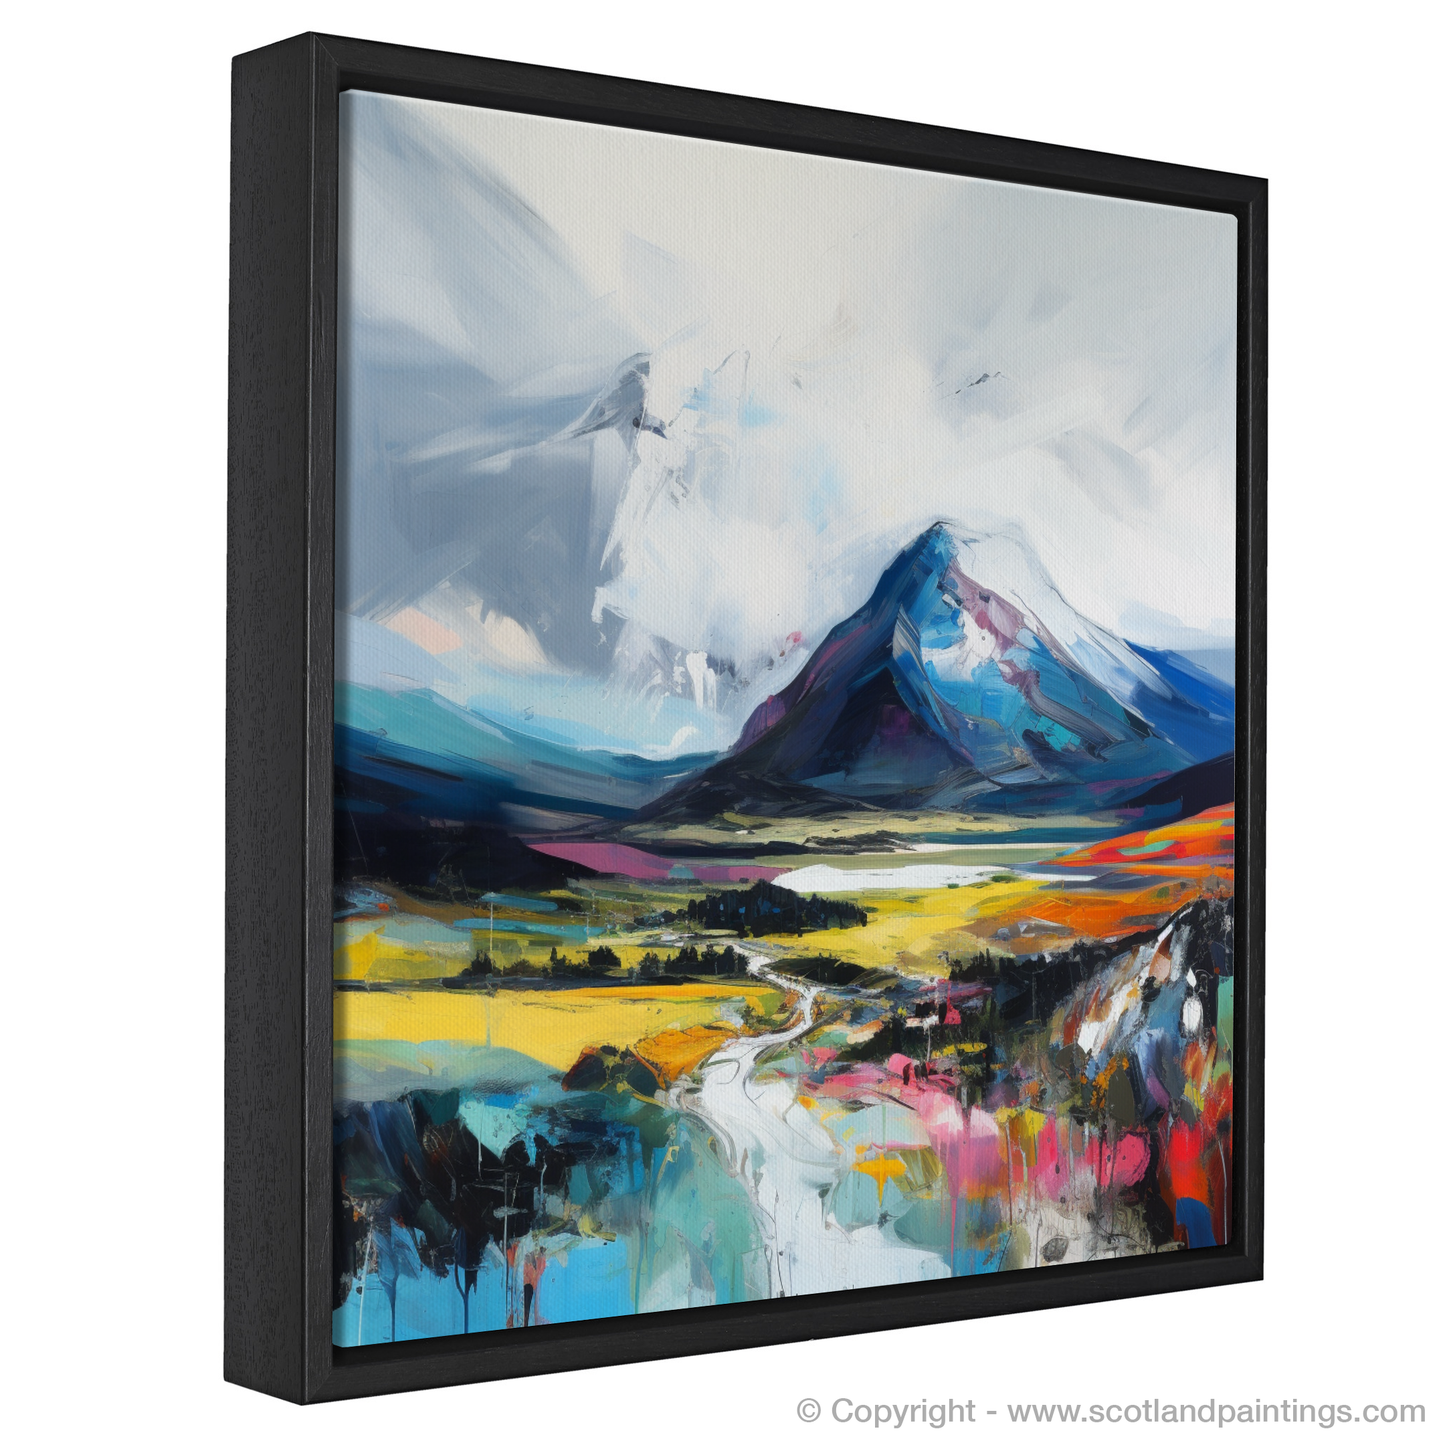 Painting and Art Print of Geal-chàrn (Drumochter) entitled "Mystic Summit: An Expressionist Journey through Geal-chàrn".